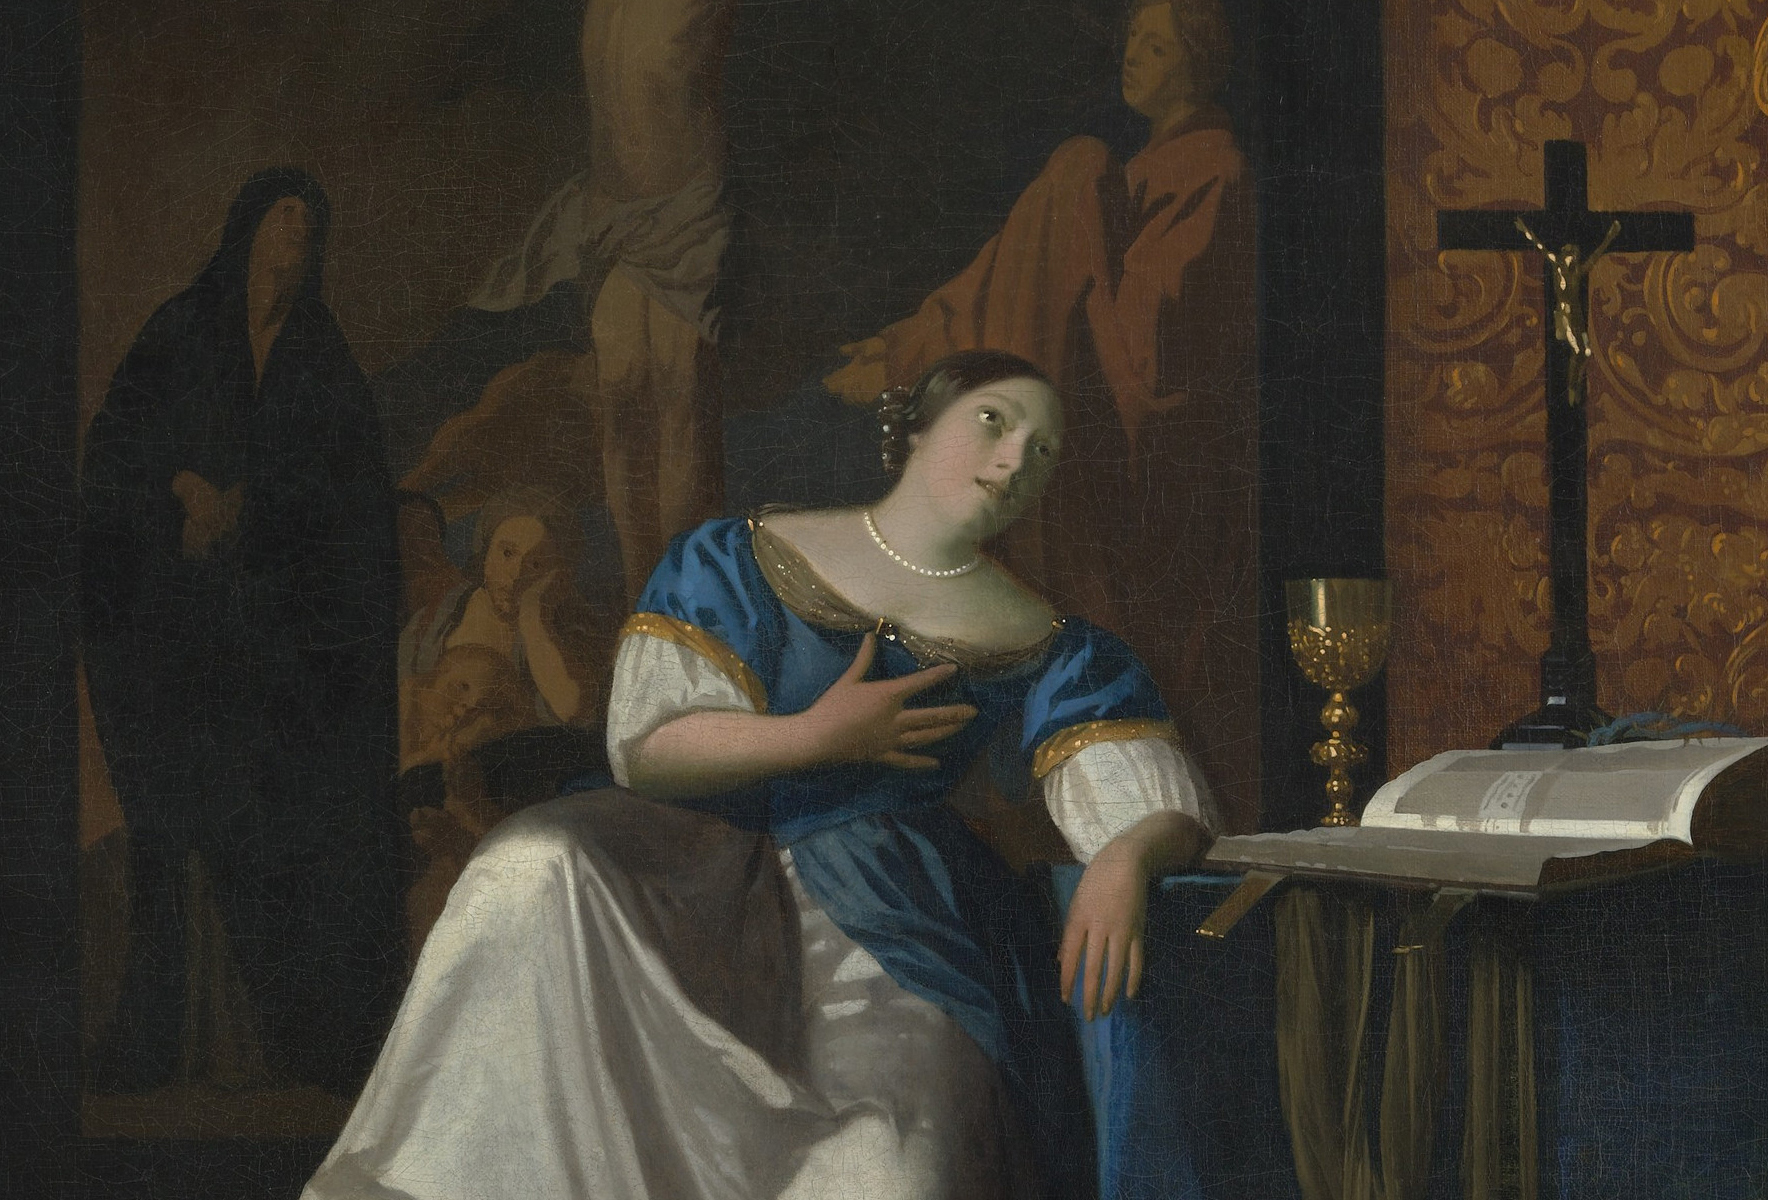 (fig. 9) Johannes Vermeer, The Allegory of Catholic Faith (detail), c. 1670–72, Metropolitan Museum of Art, The Friedsam Collection, Bequest of Michael Friedsam, 1931, image source: www.metmuseum.org